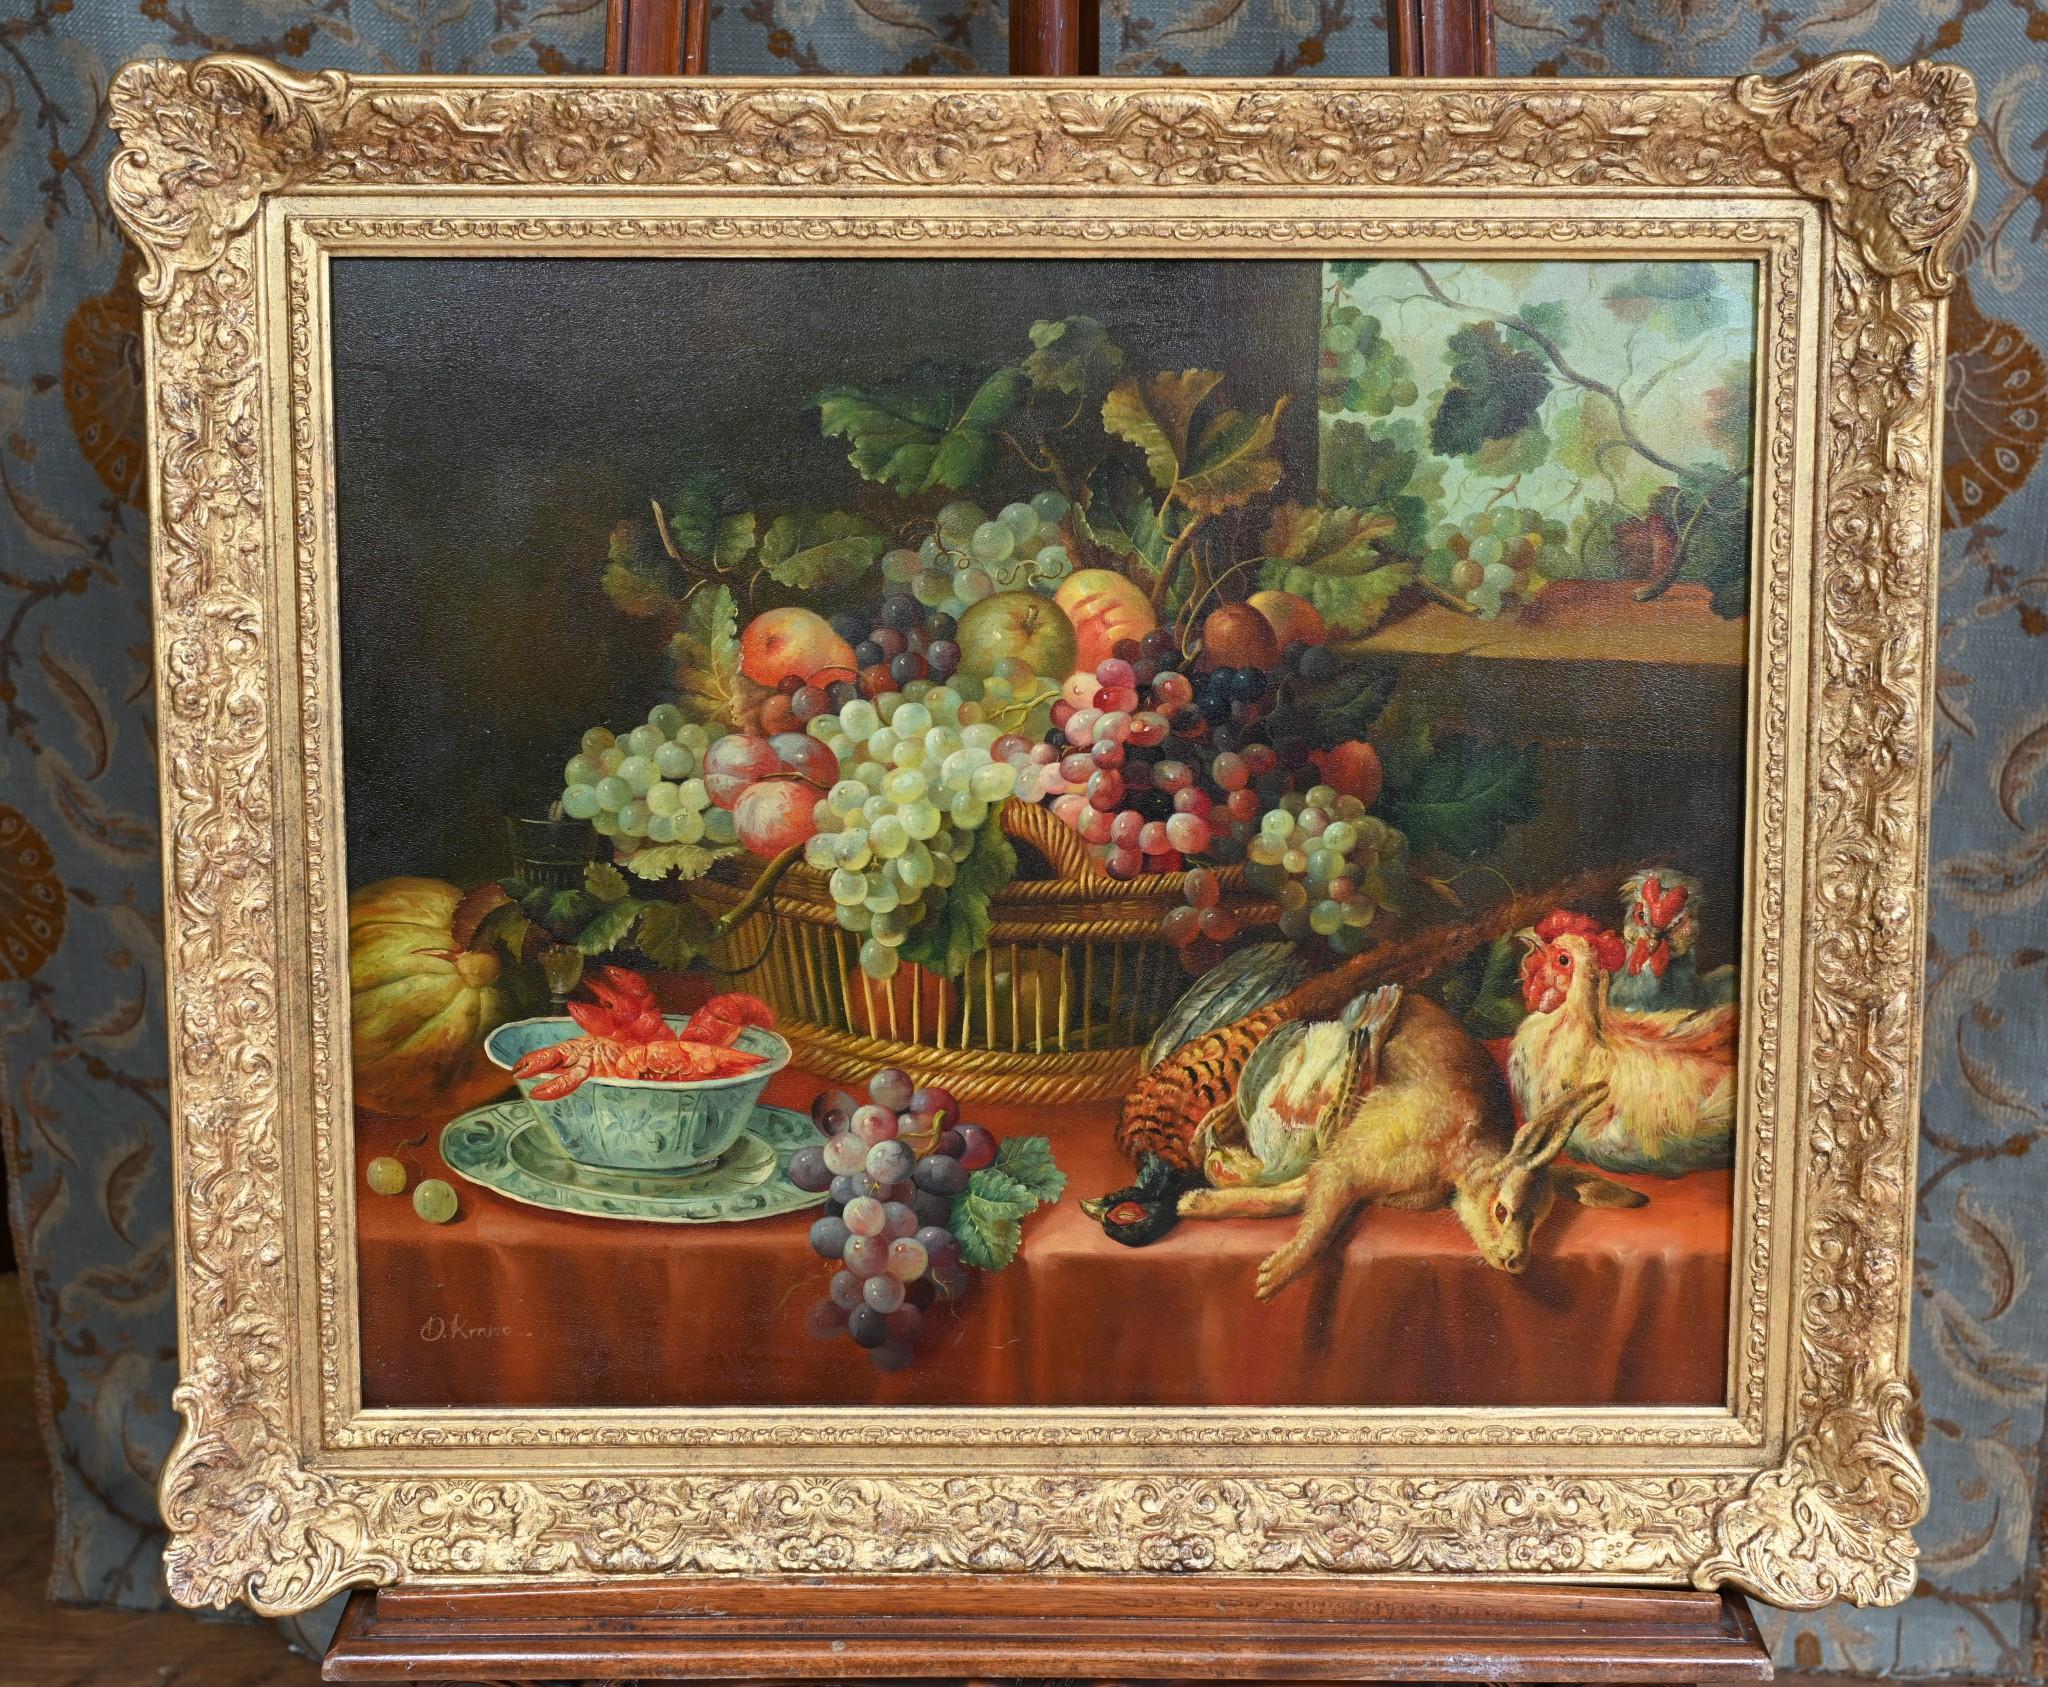 Gorgeous large still life oil painting in the Georgian manner
Shows a large still life display with fruits, a bowl with lobsters in it and various animals including pheasants, a rabbit and chickens
Very evocative classic piece
Signed in bottom left